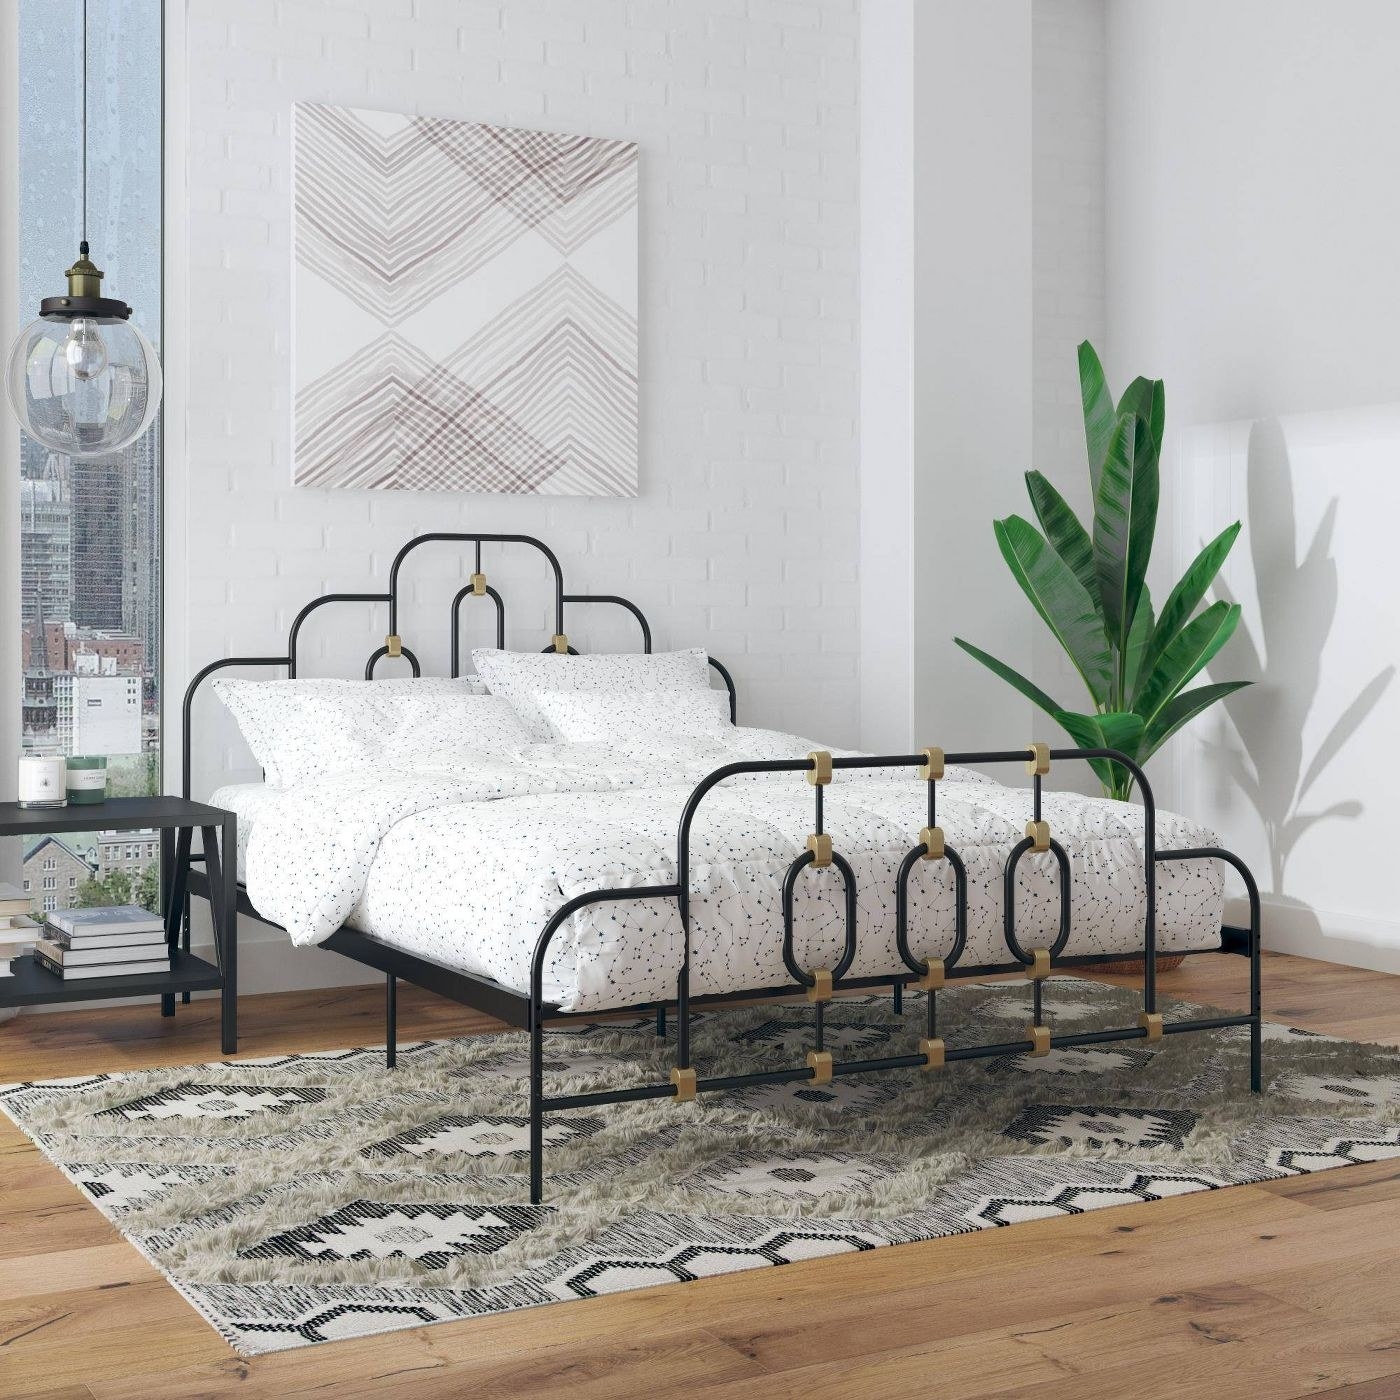 Black and gold bed frame with a white spotted comforter